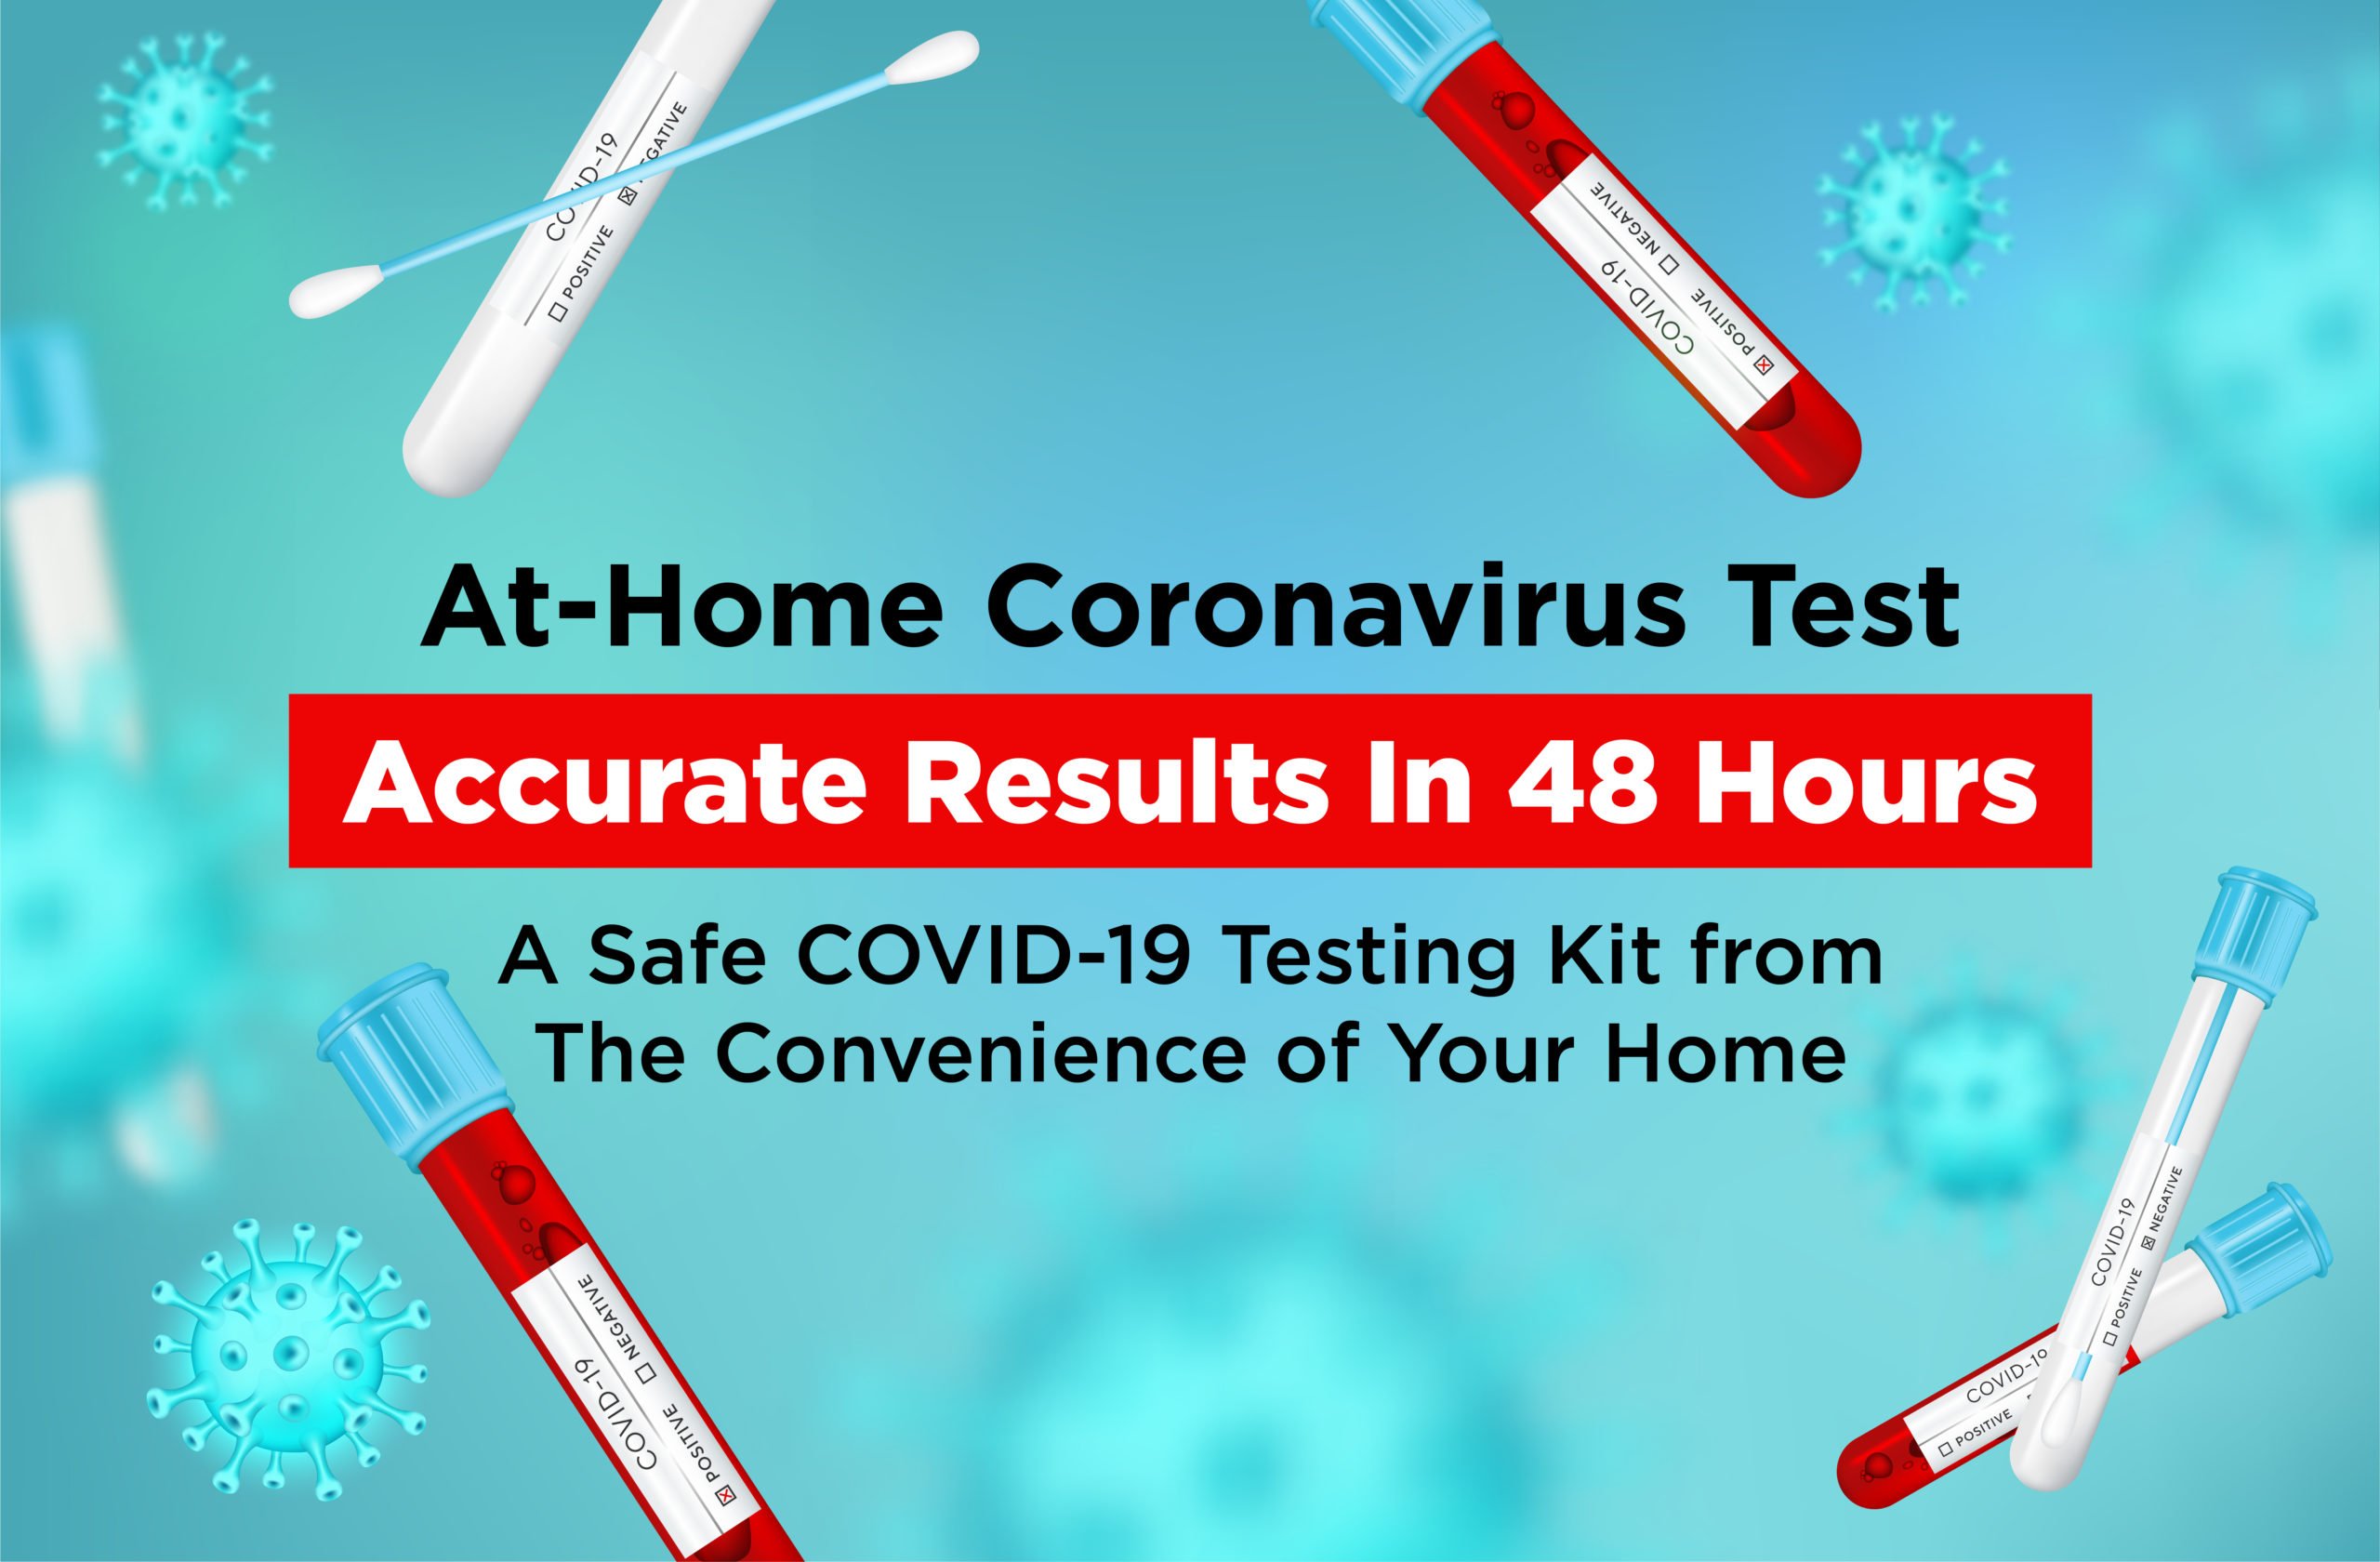 How to Get the Most Accurate Results from an At-Home COVID-19 Test